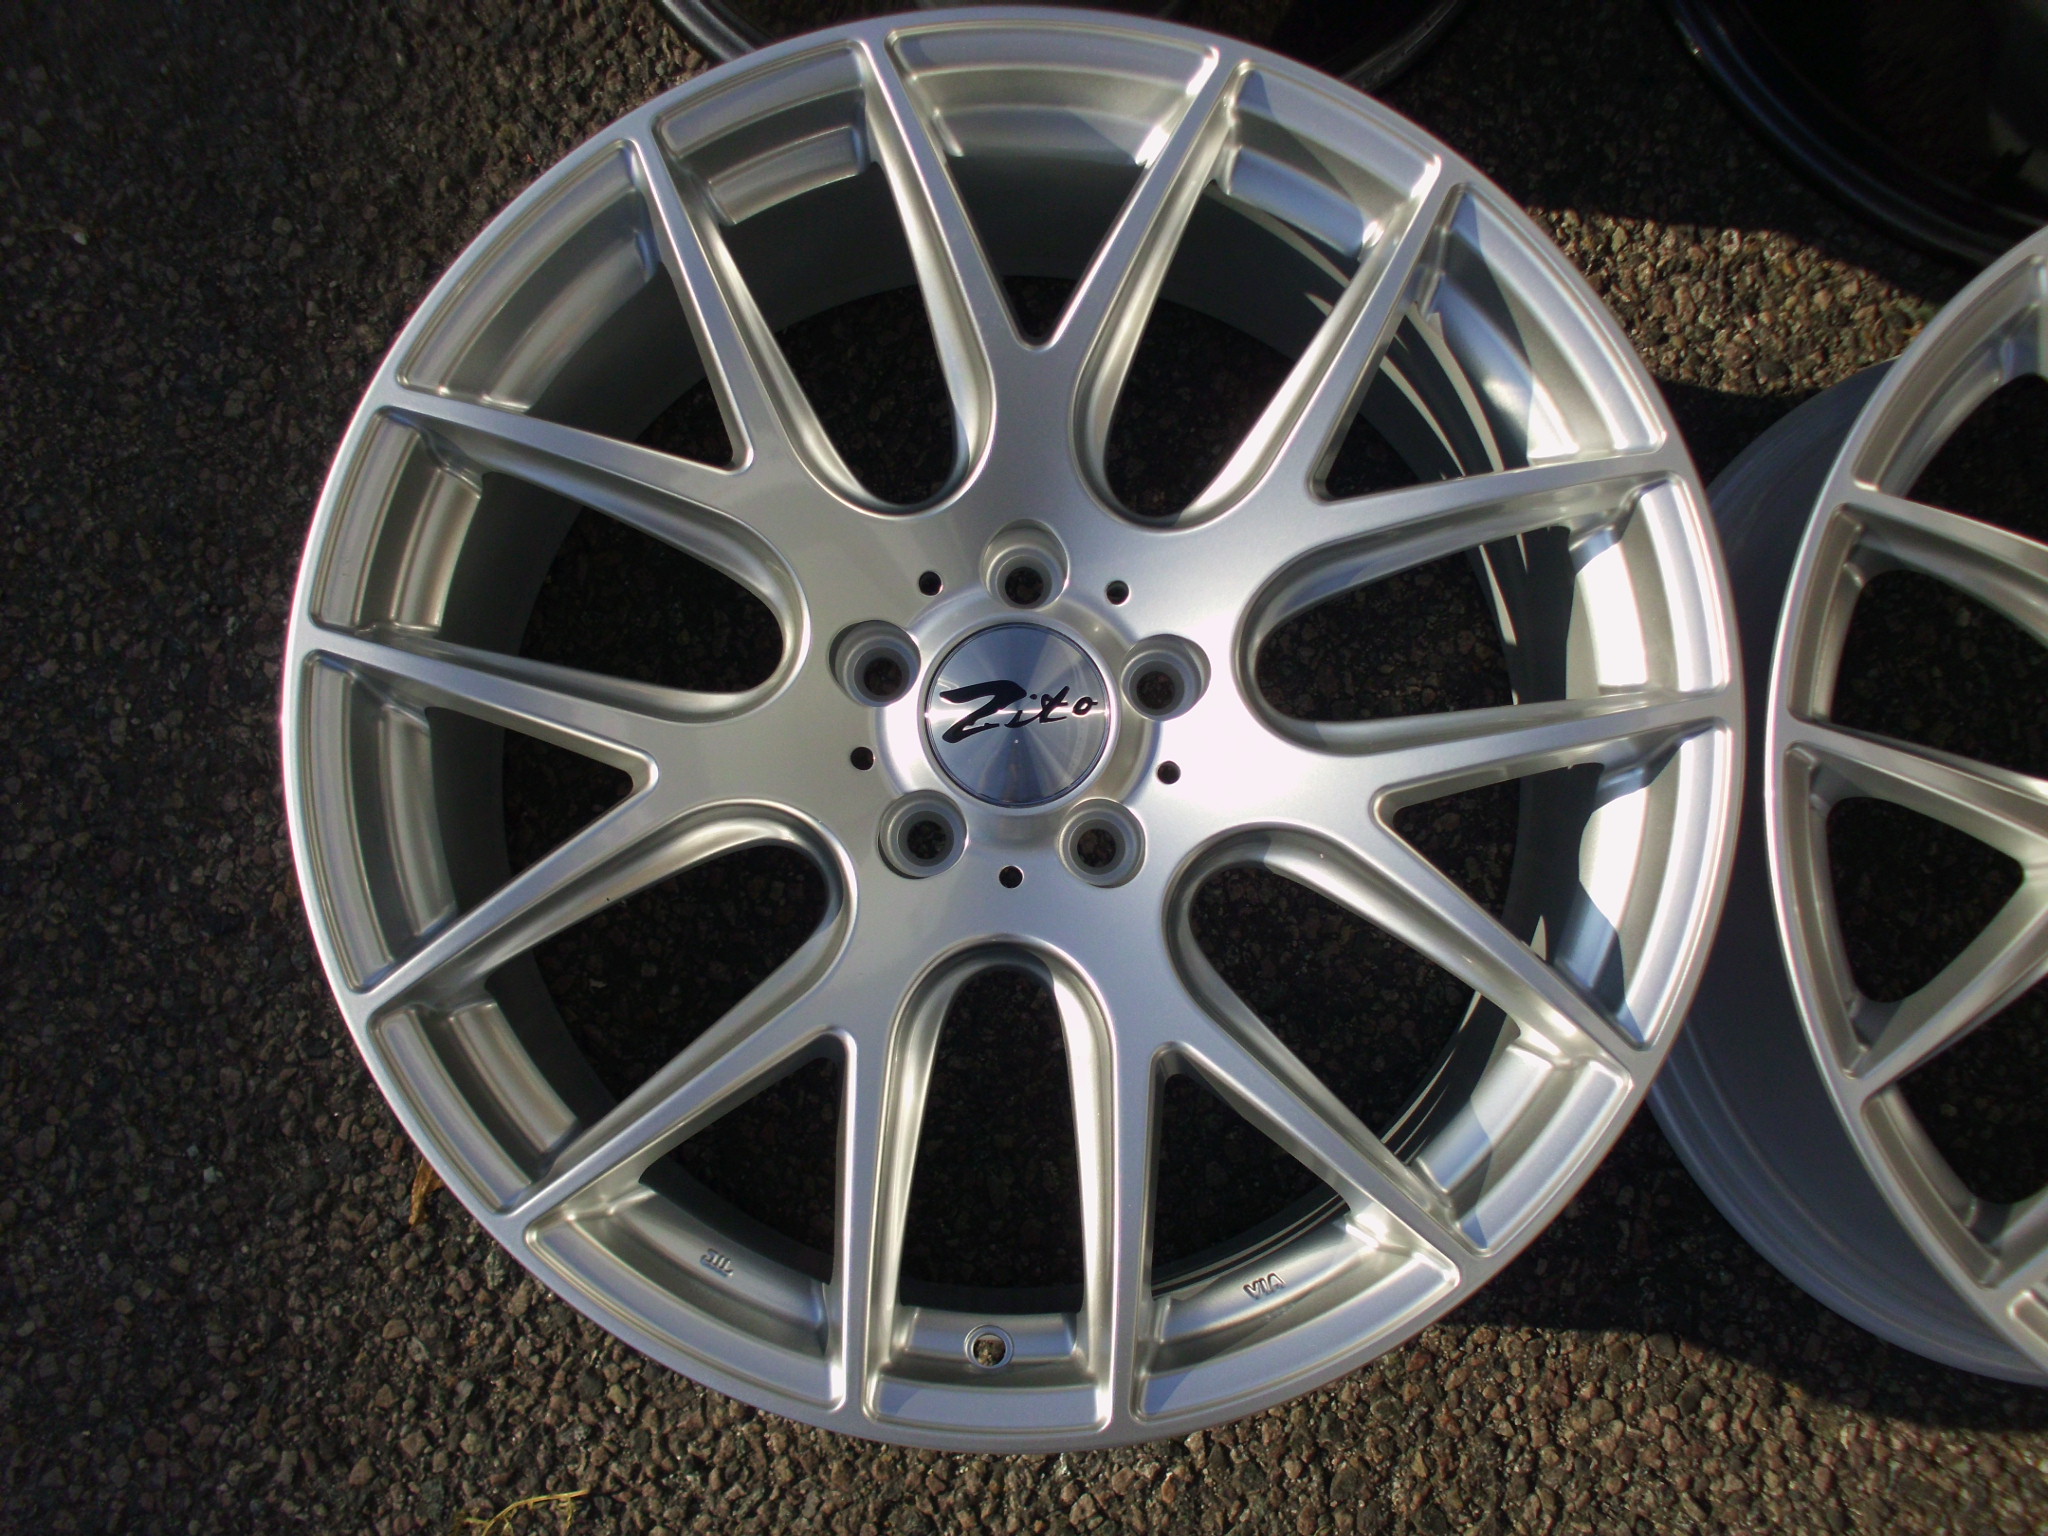 NEW USED 19  ZITO 935 ALLOY WHEELS IN HYPER SILVER  BIG CONCAVE 9 5  REARS et30 front   et35 rear 5X112